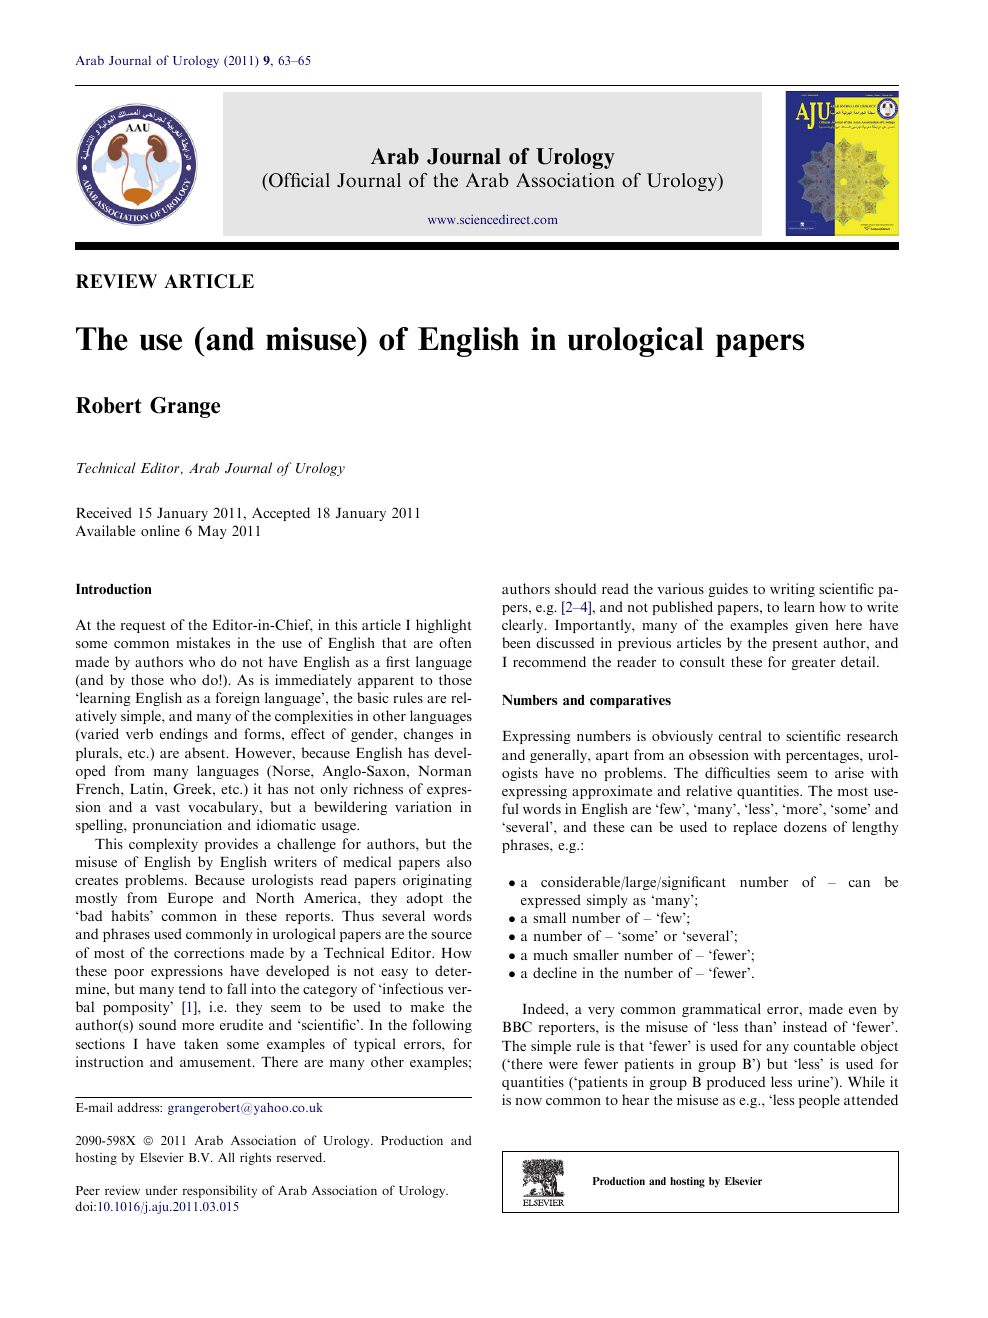 The use (and misuse) of English in urological papers – topic of